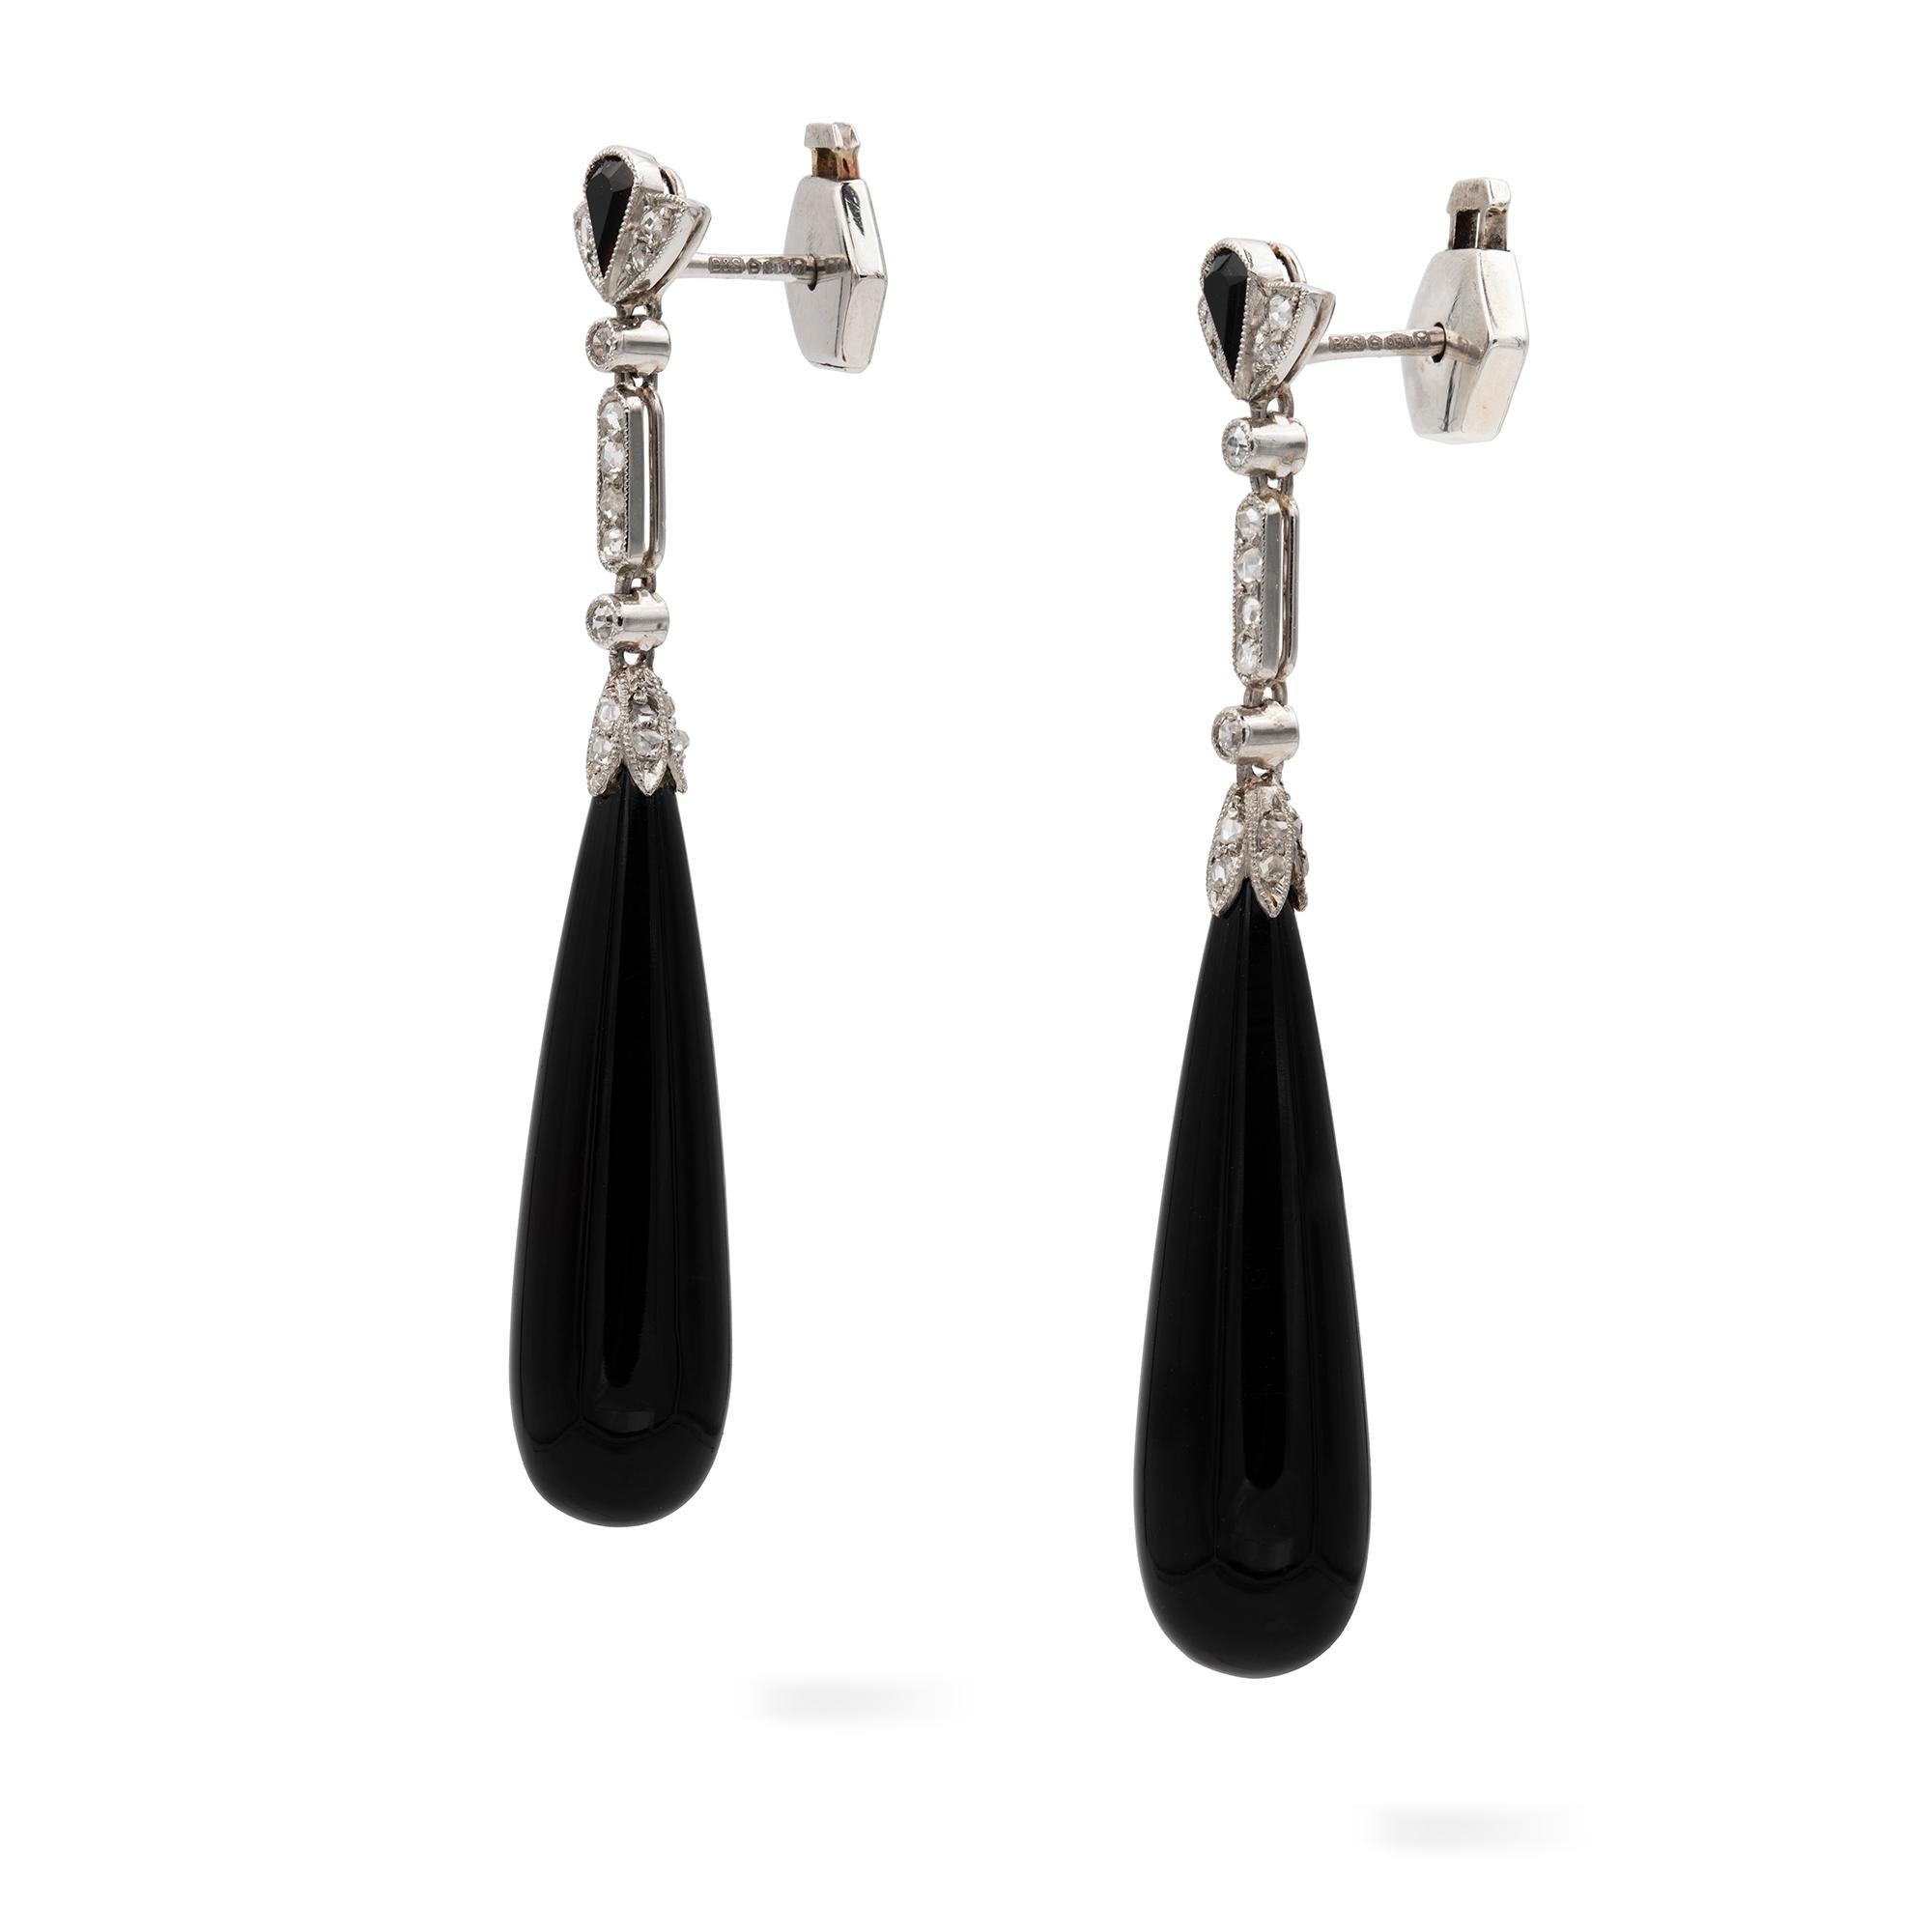 A pair of Art-Deco onyx and diamond drop earrings, each earring with a pear-shaped onyx with a rose-cut diamond set cap, suspended by a rose-cut diamond-set bar terminating to two single rose-cut diamond-set collets, to a fan-shaped top with a